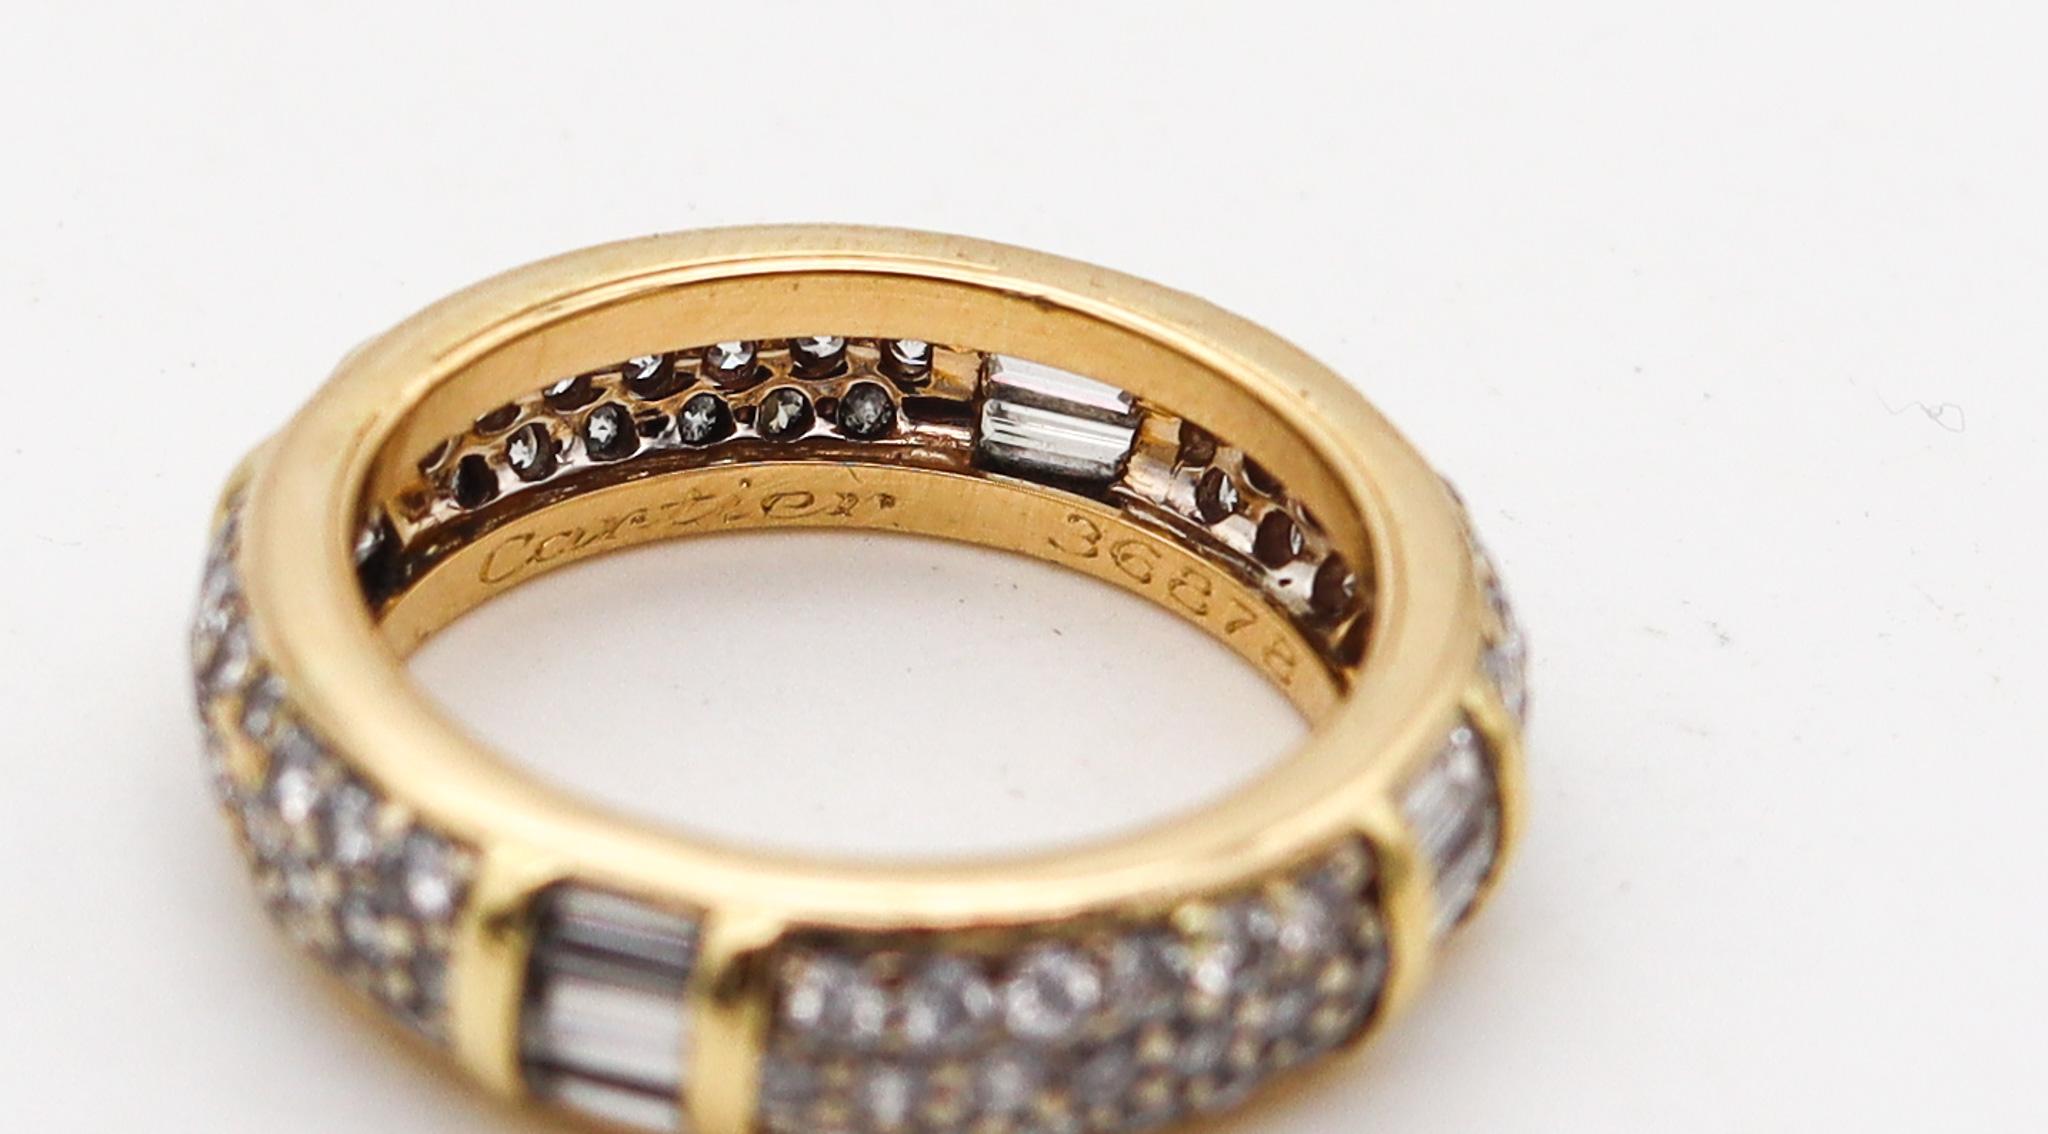 Modernist Cartier Paris Unusual Eternity Ring In 18Kt Yellow Gold With 2.12 Ctw Diamonds For Sale